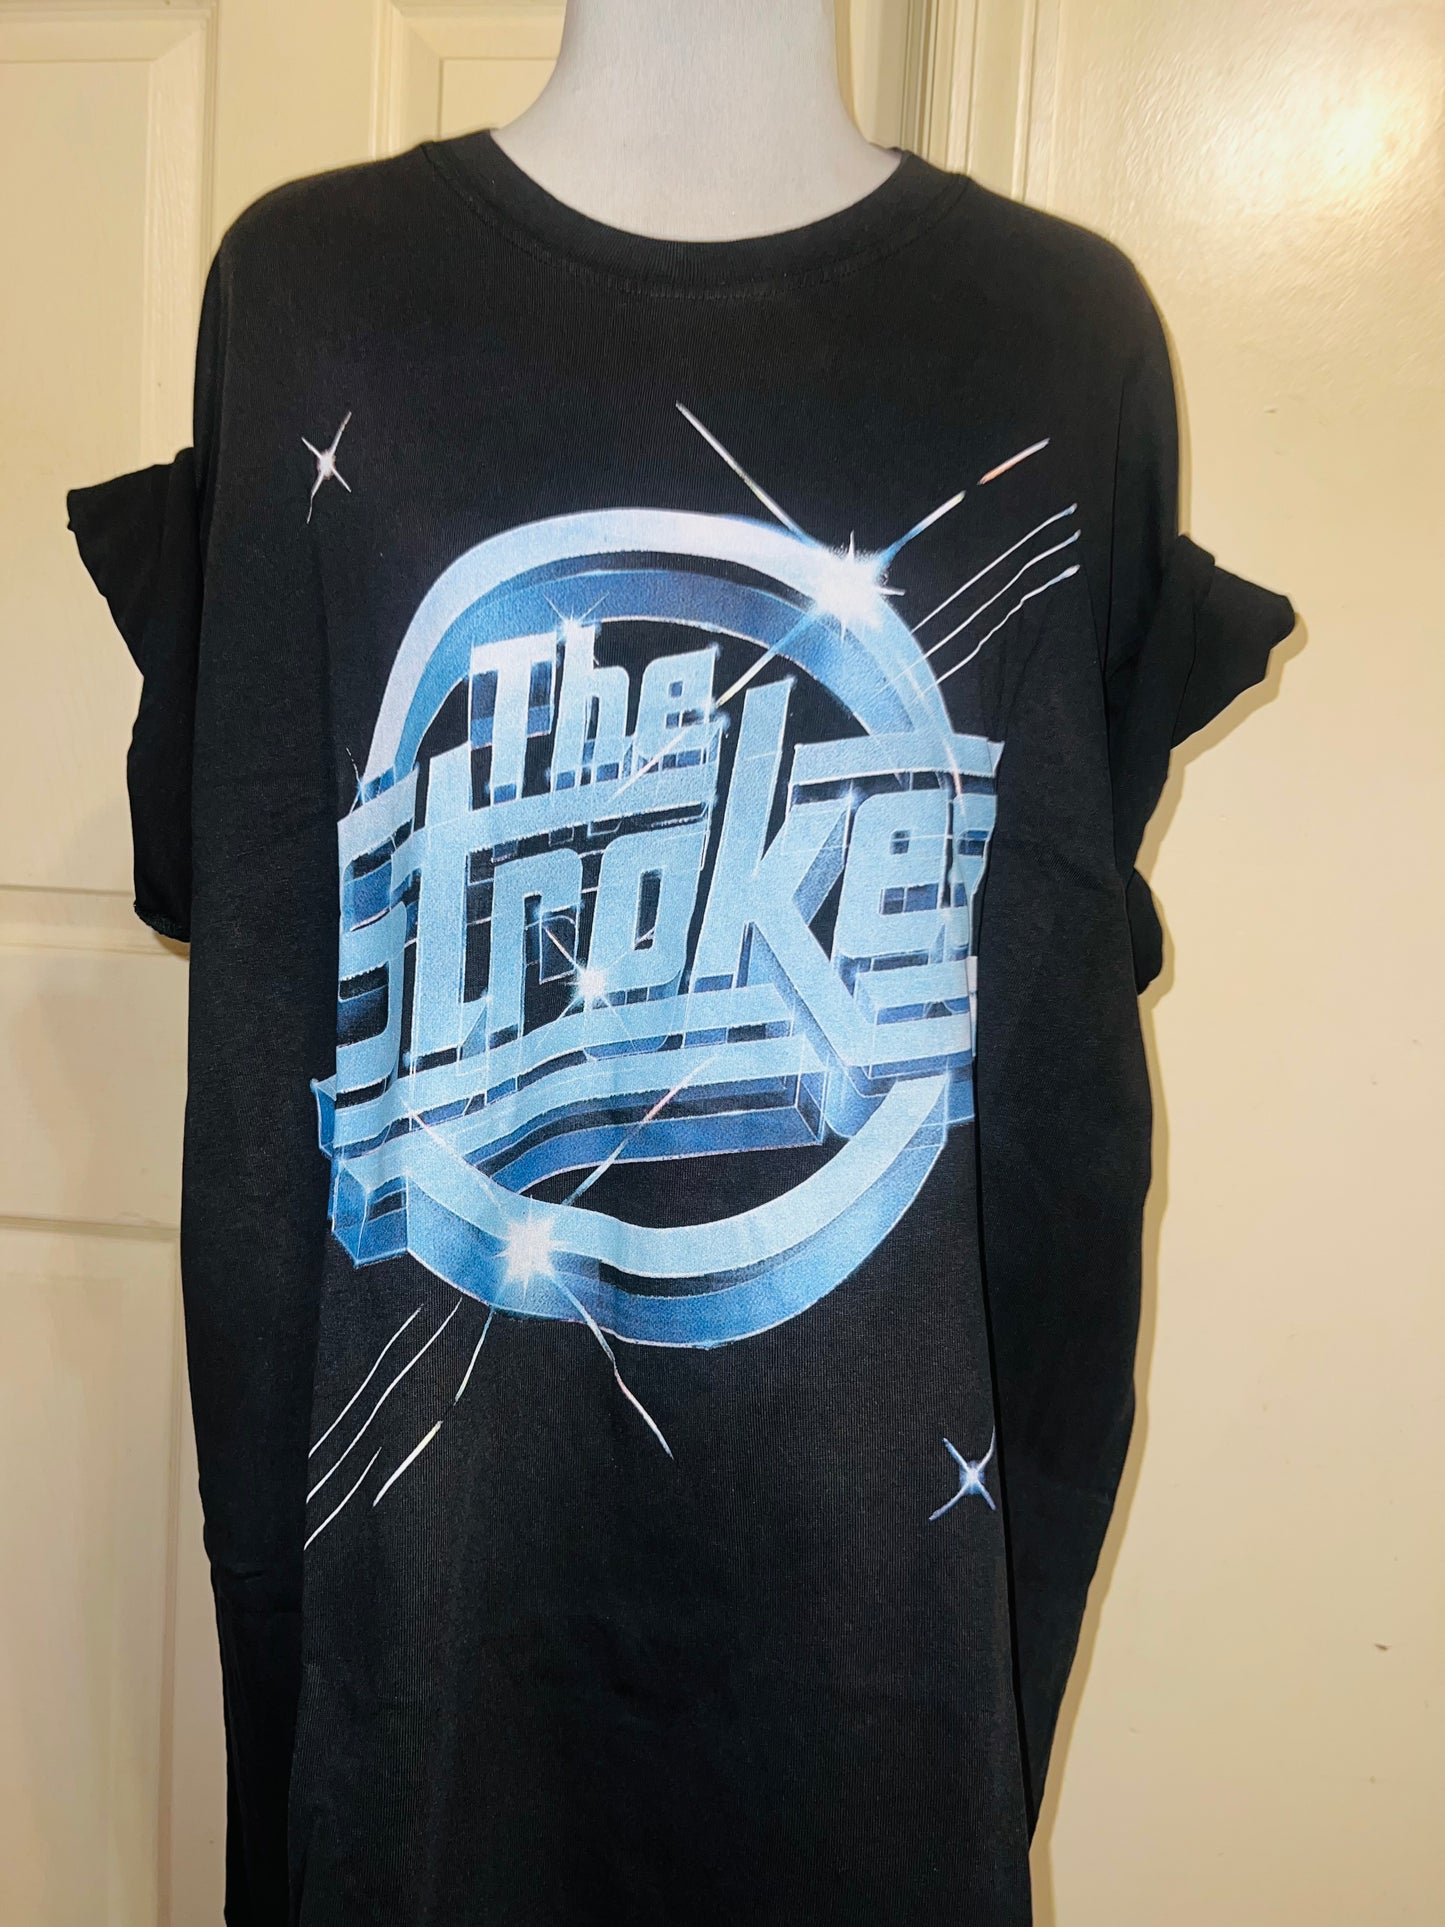 The Strokes Oversized Distressed Tee